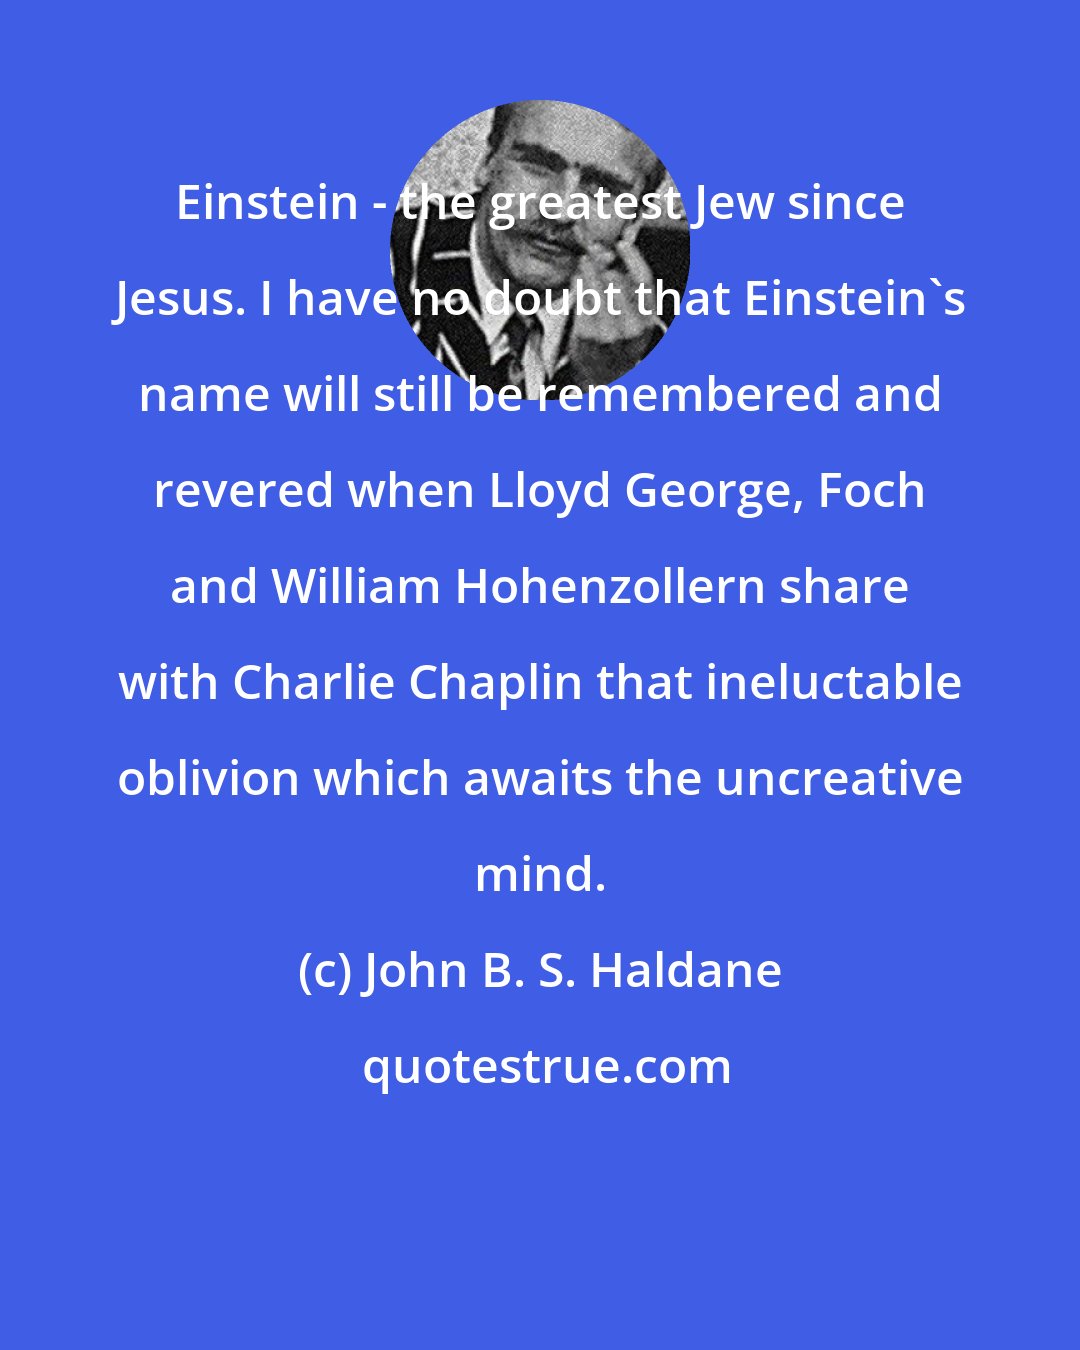 John B. S. Haldane: Einstein - the greatest Jew since Jesus. I have no doubt that Einstein's name will still be remembered and revered when Lloyd George, Foch and William Hohenzollern share with Charlie Chaplin that ineluctable oblivion which awaits the uncreative mind.